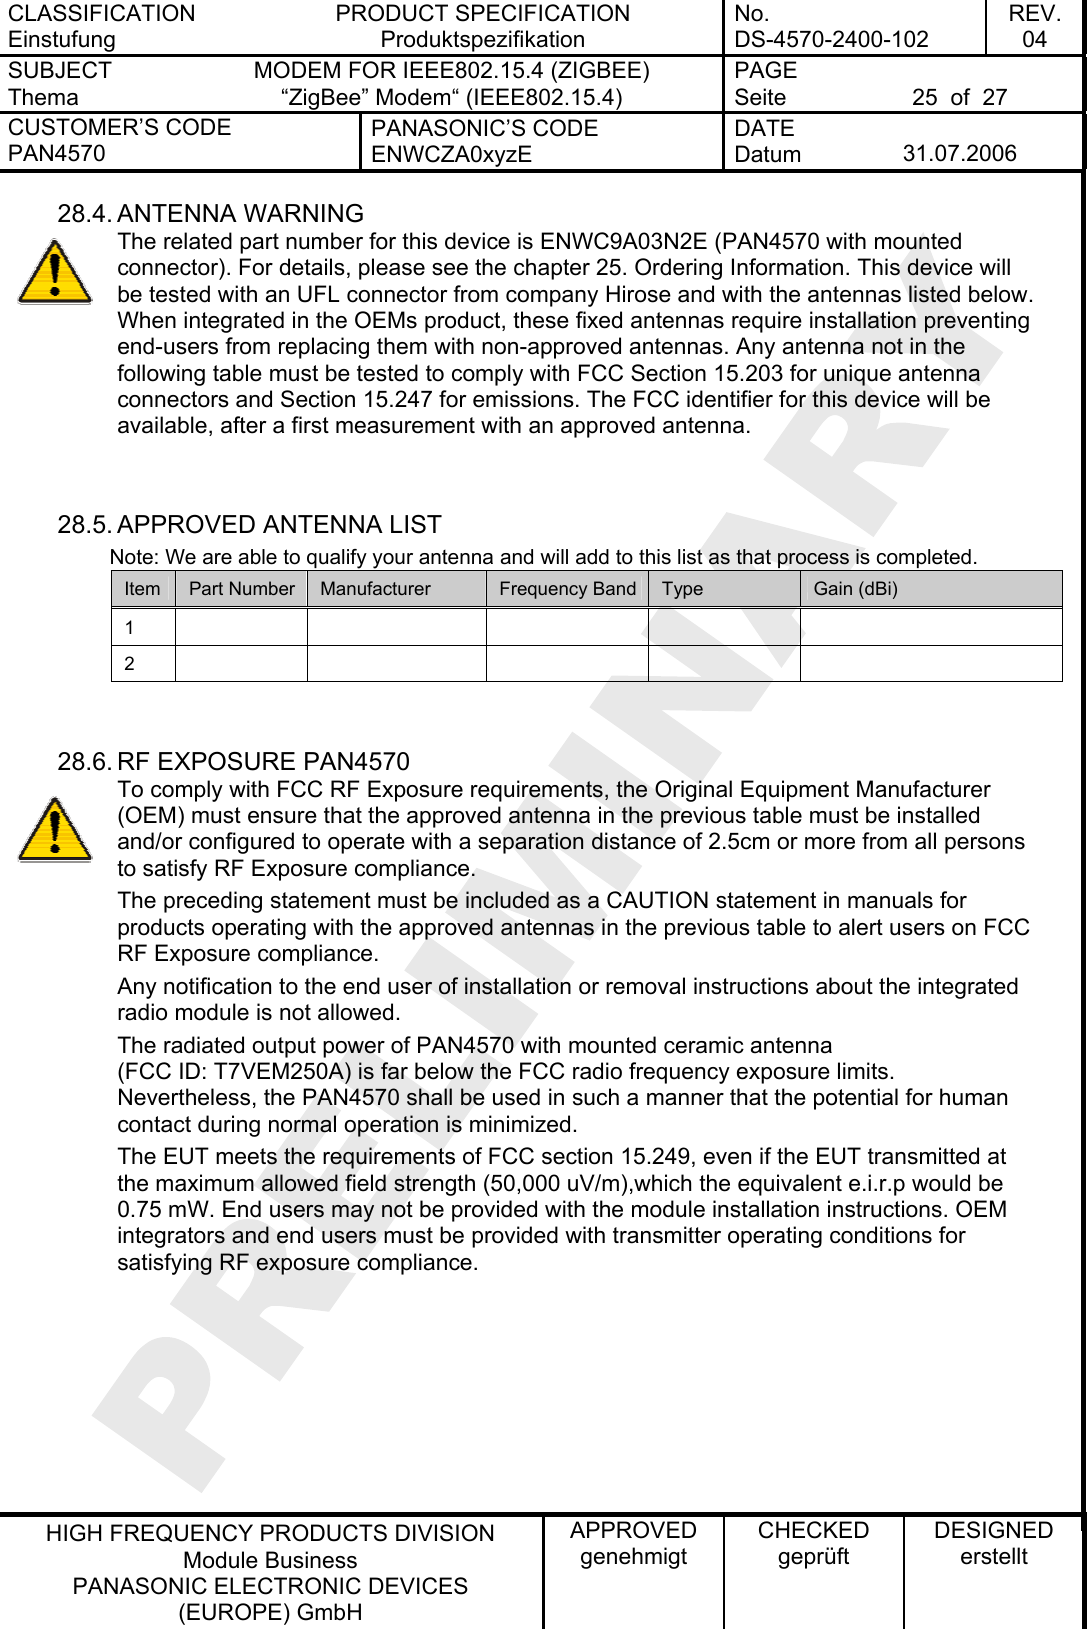 CLASSIFICATION Einstufung PRODUCT SPECIFICATION Produktspezifikation No. DS-4570-2400-102 REV. 04 SUBJECT Thema MODEM FOR IEEE802.15.4 (ZIGBEE) “ZigBee” Modem“ (IEEE802.15.4)   PAGE Seite  25  of  27 CUSTOMER’S CODE PAN4570 PANASONIC’S CODE ENWCZA0xyzE DATE Datum  31.07.2006   HIGH FREQUENCY PRODUCTS DIVISION Module Business PANASONIC ELECTRONIC DEVICES  (EUROPE) GmbH APPROVED genehmigt CHECKED geprüft DESIGNED erstellt 28.4. ANTENNA WARNING The related part number for this device is ENWC9A03N2E (PAN4570 with mounted connector). For details, please see the chapter 25. Ordering Information. This device will be tested with an UFL connector from company Hirose and with the antennas listed below. When integrated in the OEMs product, these fixed antennas require installation preventing end-users from replacing them with non-approved antennas. Any antenna not in the following table must be tested to comply with FCC Section 15.203 for unique antenna connectors and Section 15.247 for emissions. The FCC identifier for this device will be available, after a first measurement with an approved antenna.   28.5. APPROVED ANTENNA LIST          Note: We are able to qualify your antenna and will add to this list as that process is completed. Item  Part Number  Manufacturer  Frequency Band  Type  Gain (dBi) 1          2            28.6. RF EXPOSURE PAN4570 To comply with FCC RF Exposure requirements, the Original Equipment Manufacturer (OEM) must ensure that the approved antenna in the previous table must be installed and/or configured to operate with a separation distance of 2.5cm or more from all persons to satisfy RF Exposure compliance. The preceding statement must be included as a CAUTION statement in manuals for products operating with the approved antennas in the previous table to alert users on FCC RF Exposure compliance. Any notification to the end user of installation or removal instructions about the integrated radio module is not allowed. The radiated output power of PAN4570 with mounted ceramic antenna (FCC ID: T7VEM250A) is far below the FCC radio frequency exposure limits. Nevertheless, the PAN4570 shall be used in such a manner that the potential for human contact during normal operation is minimized. The EUT meets the requirements of FCC section 15.249, even if the EUT transmitted at the maximum allowed field strength (50,000 uV/m),which the equivalent e.i.r.p would be 0.75 mW. End users may not be provided with the module installation instructions. OEM integrators and end users must be provided with transmitter operating conditions for satisfying RF exposure compliance.   